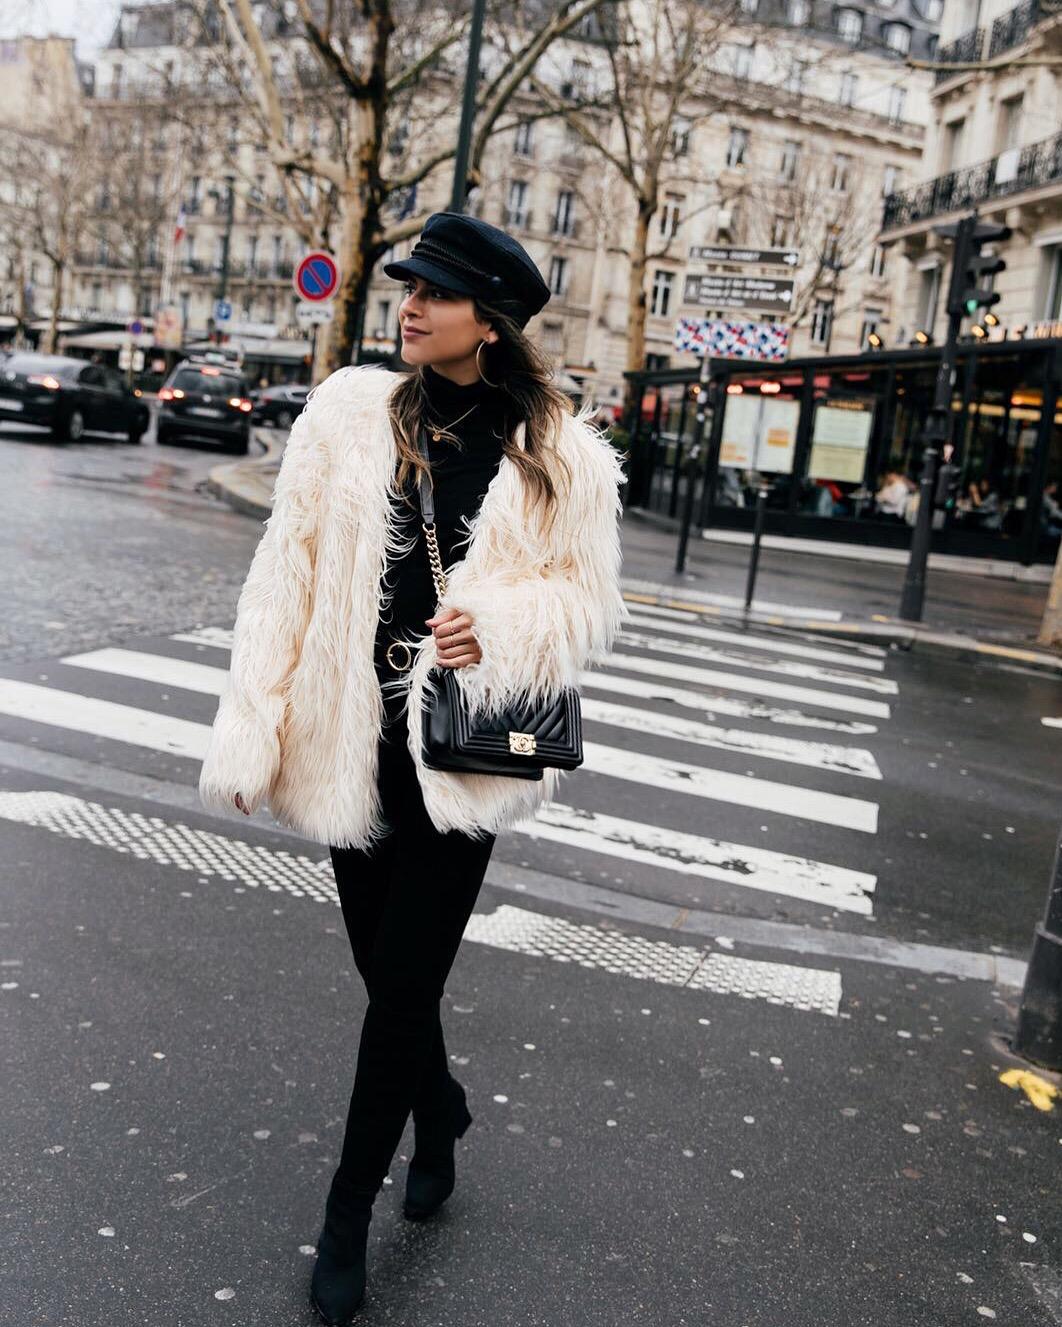 TheGirlFromPanama.com | In Paris With Armani Beauty | White Faux Fur Coat with Black Outfit in Paris, France